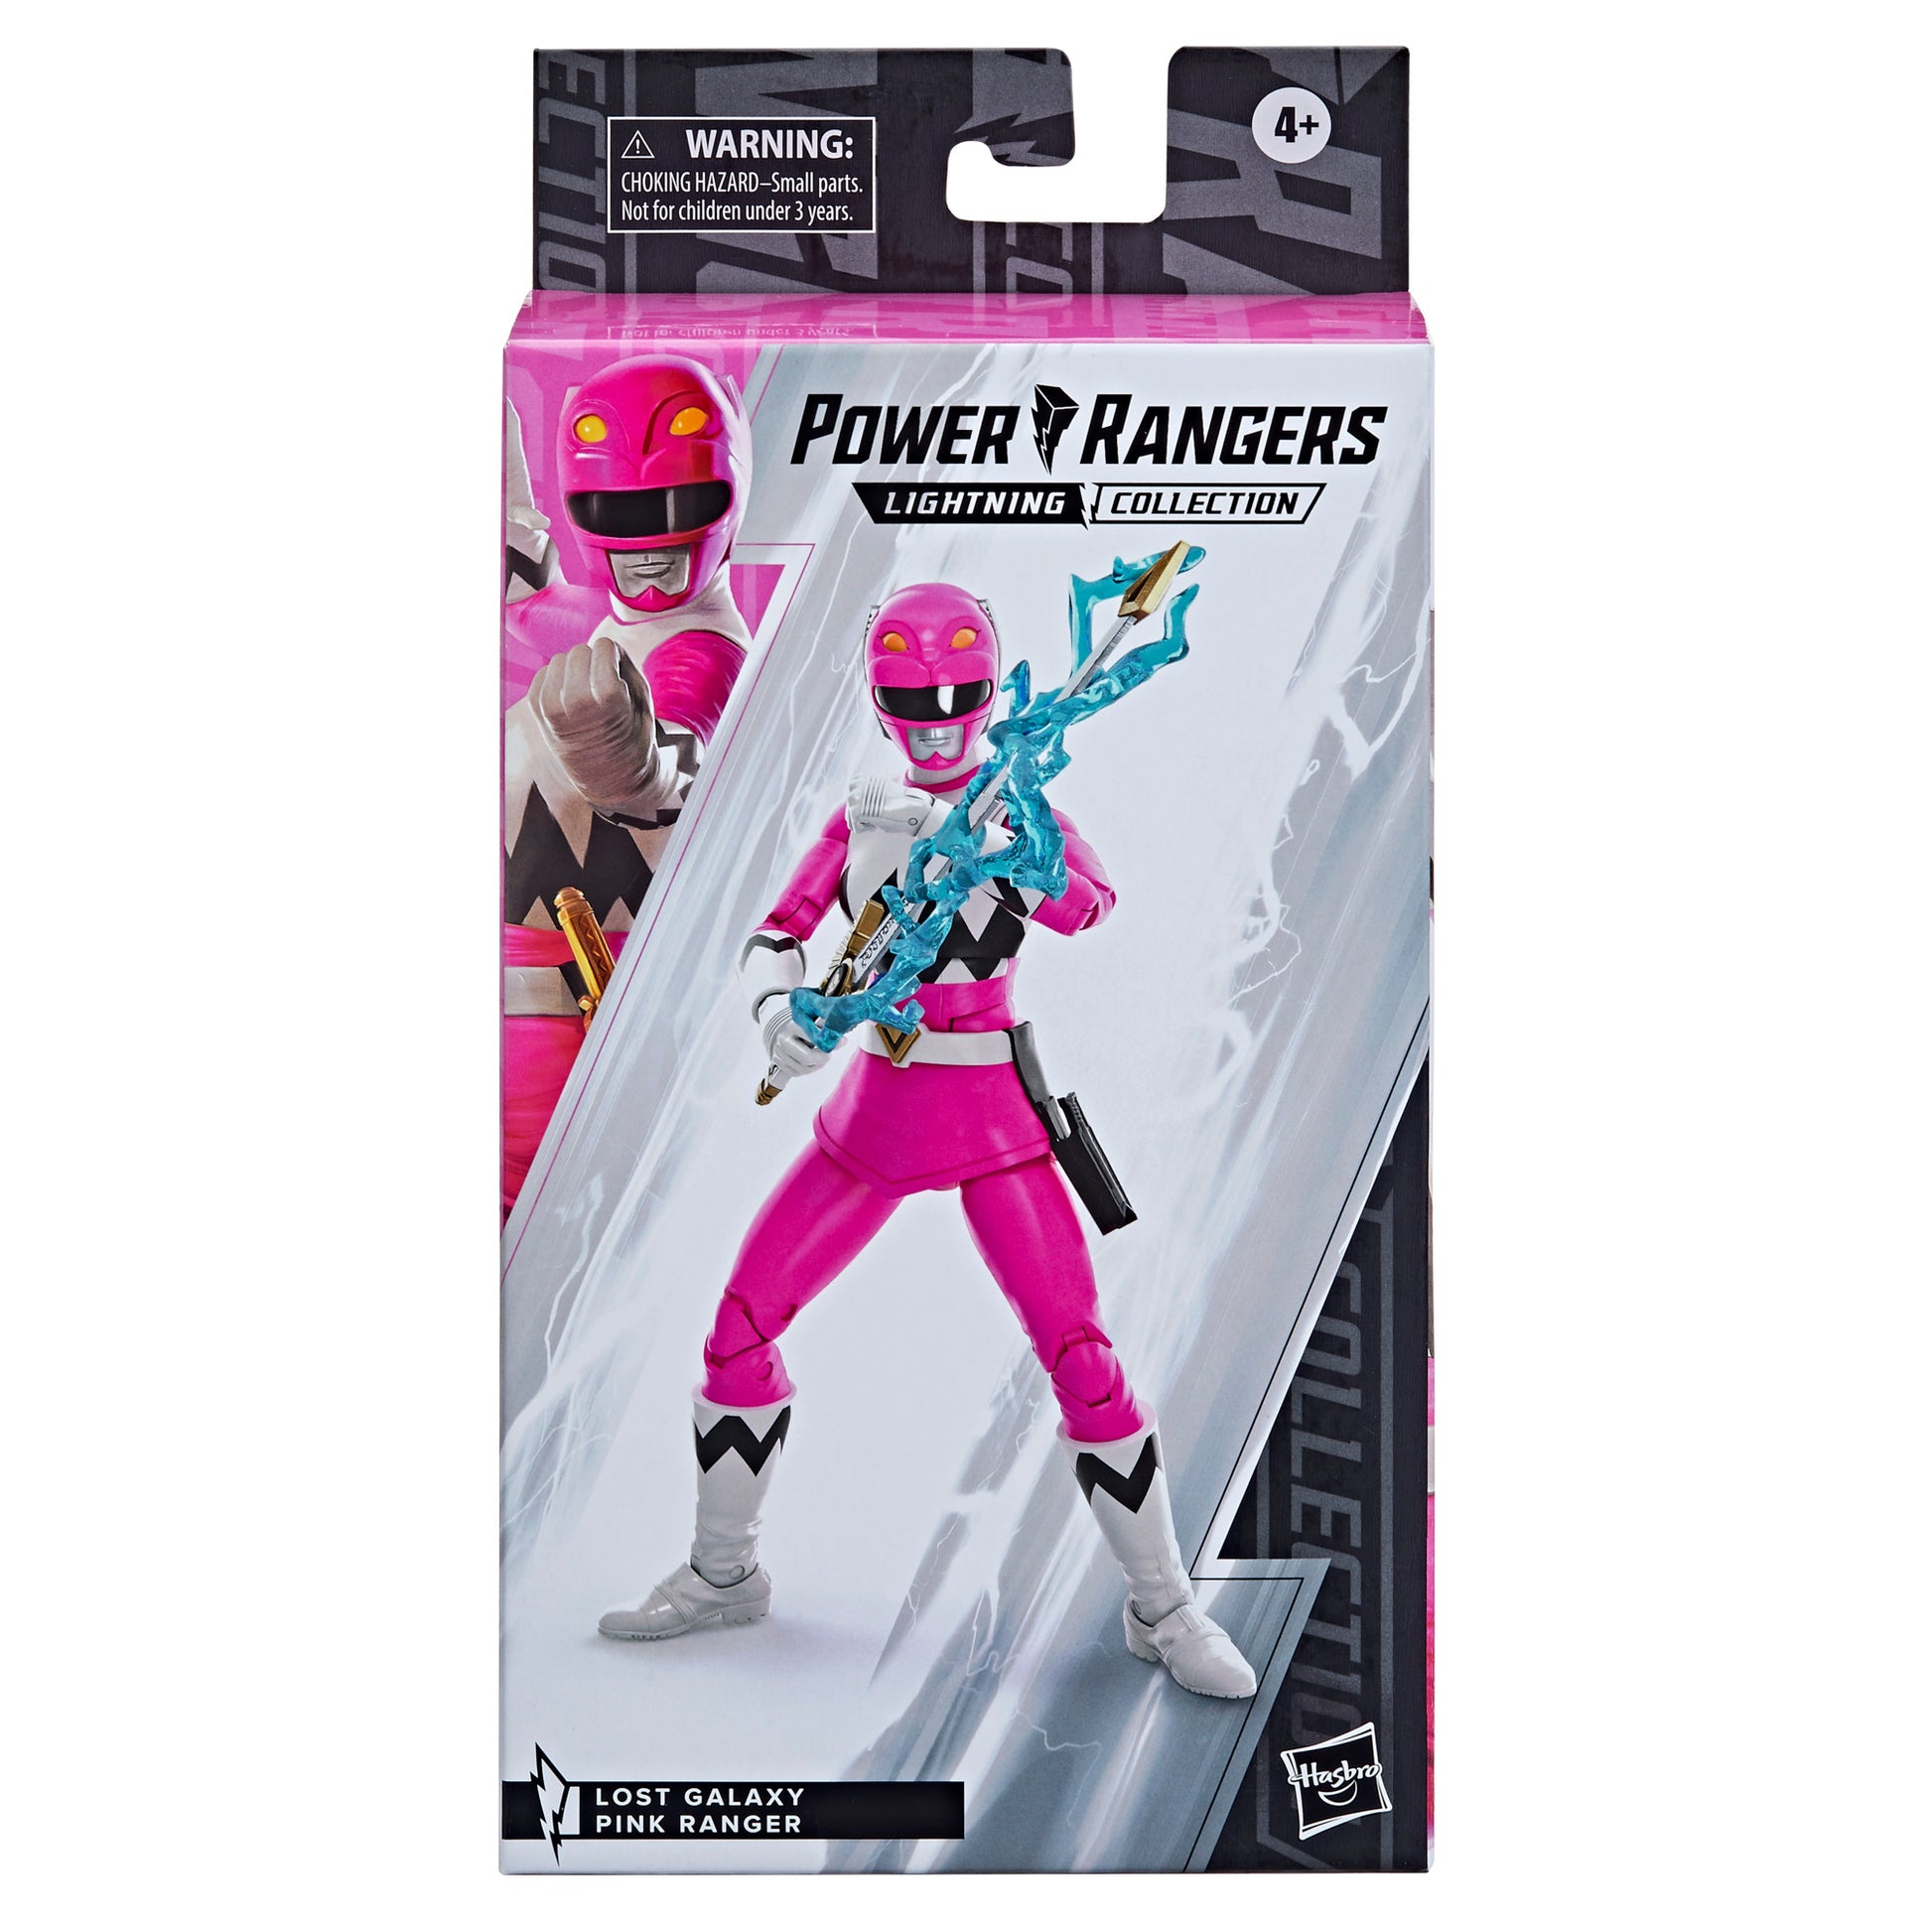 Power Rangers Lightning Collection Lost Galaxy Pink Ranger Figure Toy box front view - Heretoserveyou